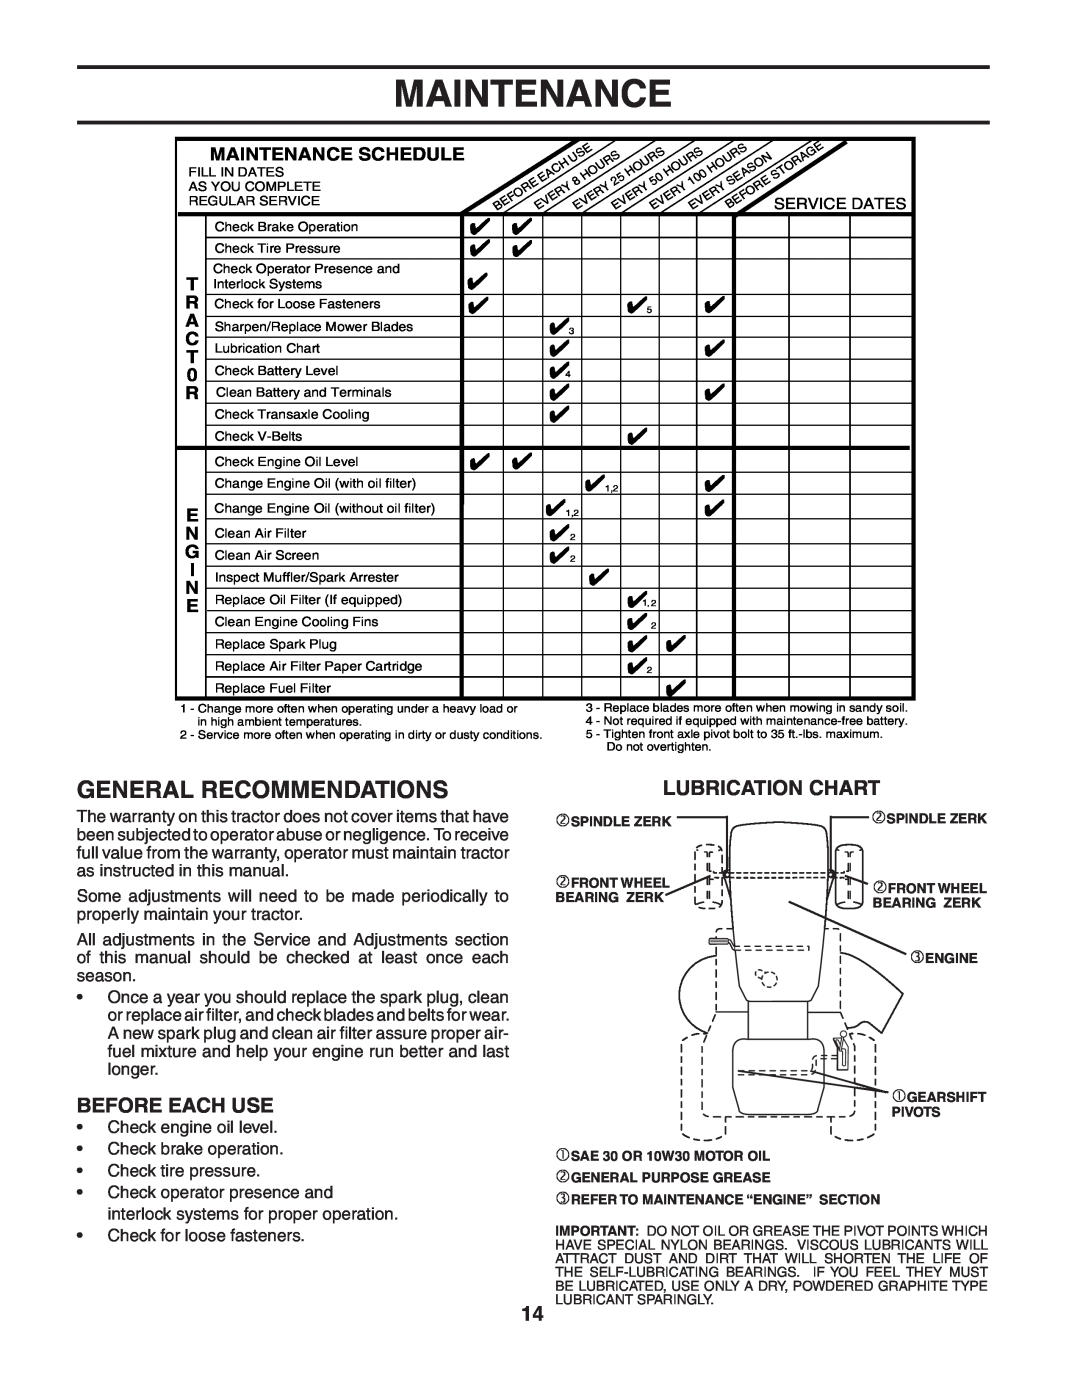 Poulan PO1742STB manual Maintenance, General Recommendations, Before Each Use, Lubrication Chart 